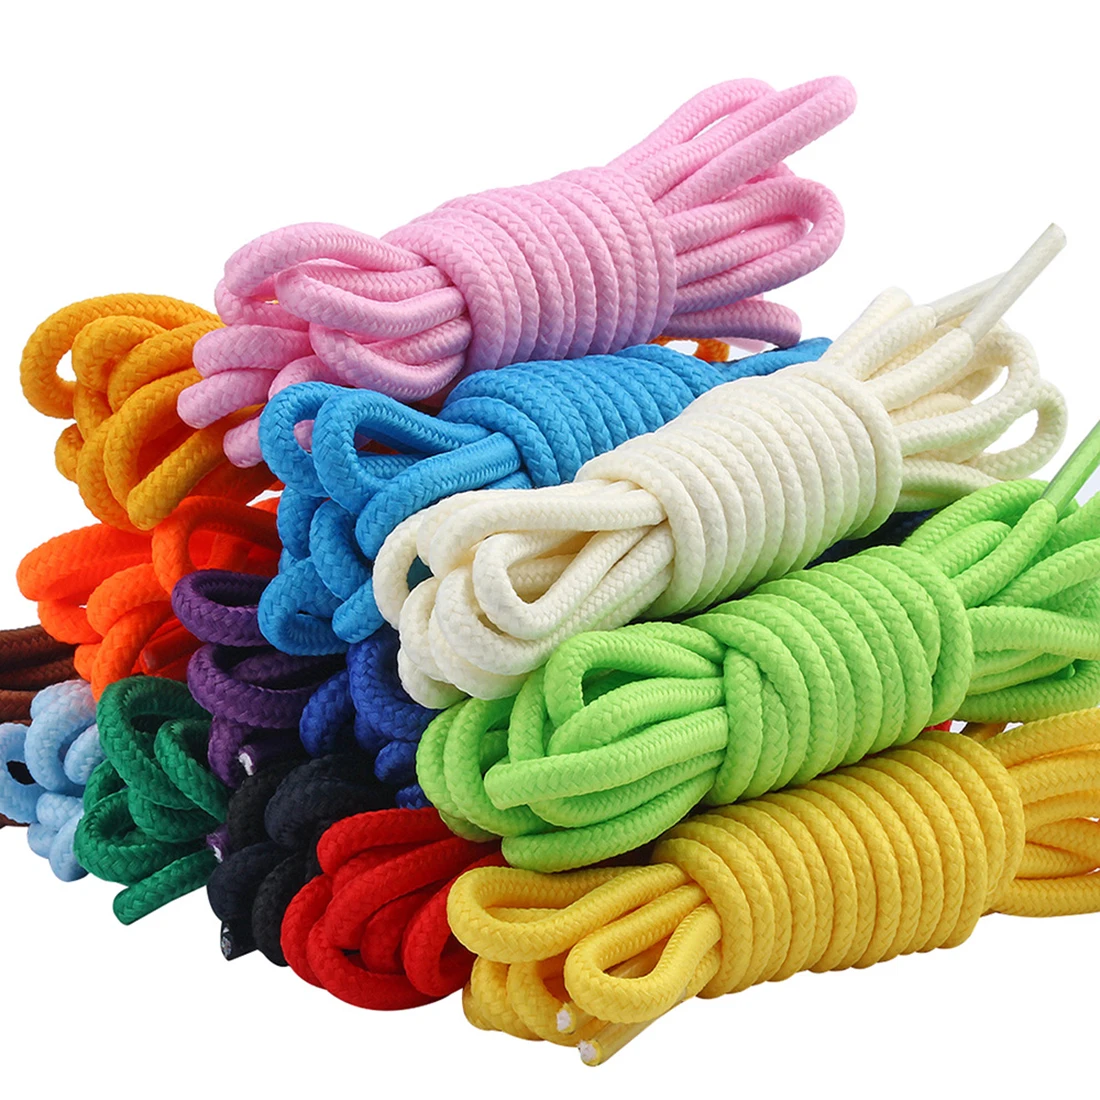 

100cm/150cm Long of Round Shoelaces Shoe Strings Shoe Laces Cord Ropes for Boots Sneakers Unisex Rope Multi Color Waxed